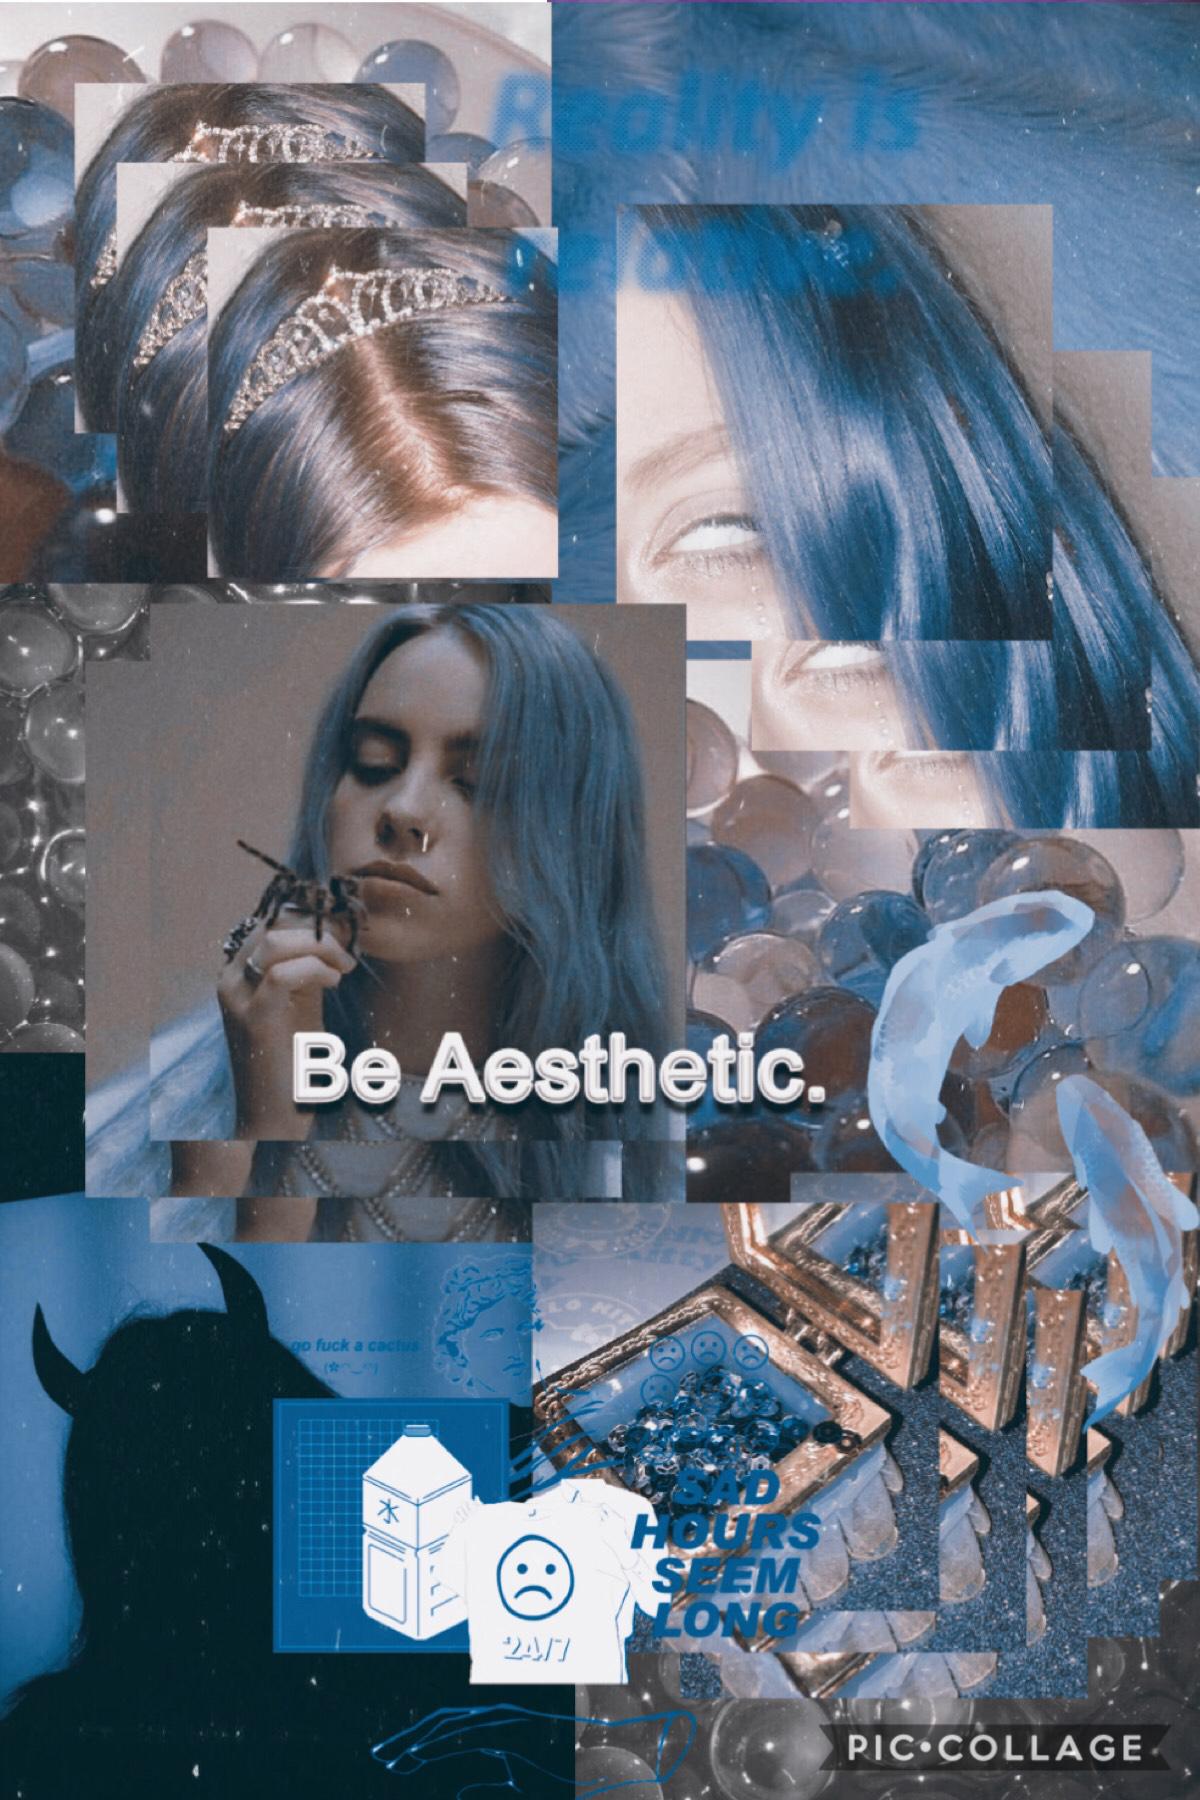 ✨💙🐚𝒸𝓁𝒾𝒸𝓀 𝒽𝑒𝓇𝑒 🐚💙✨

Billie Eilish | #aesthetic #blue #white 
—————————
Hey guys, im back after such a long break from here. I hope i can meet lots of cool, good and talented people in here. I also hope to share all random yet good edits i hope i’ll ve able